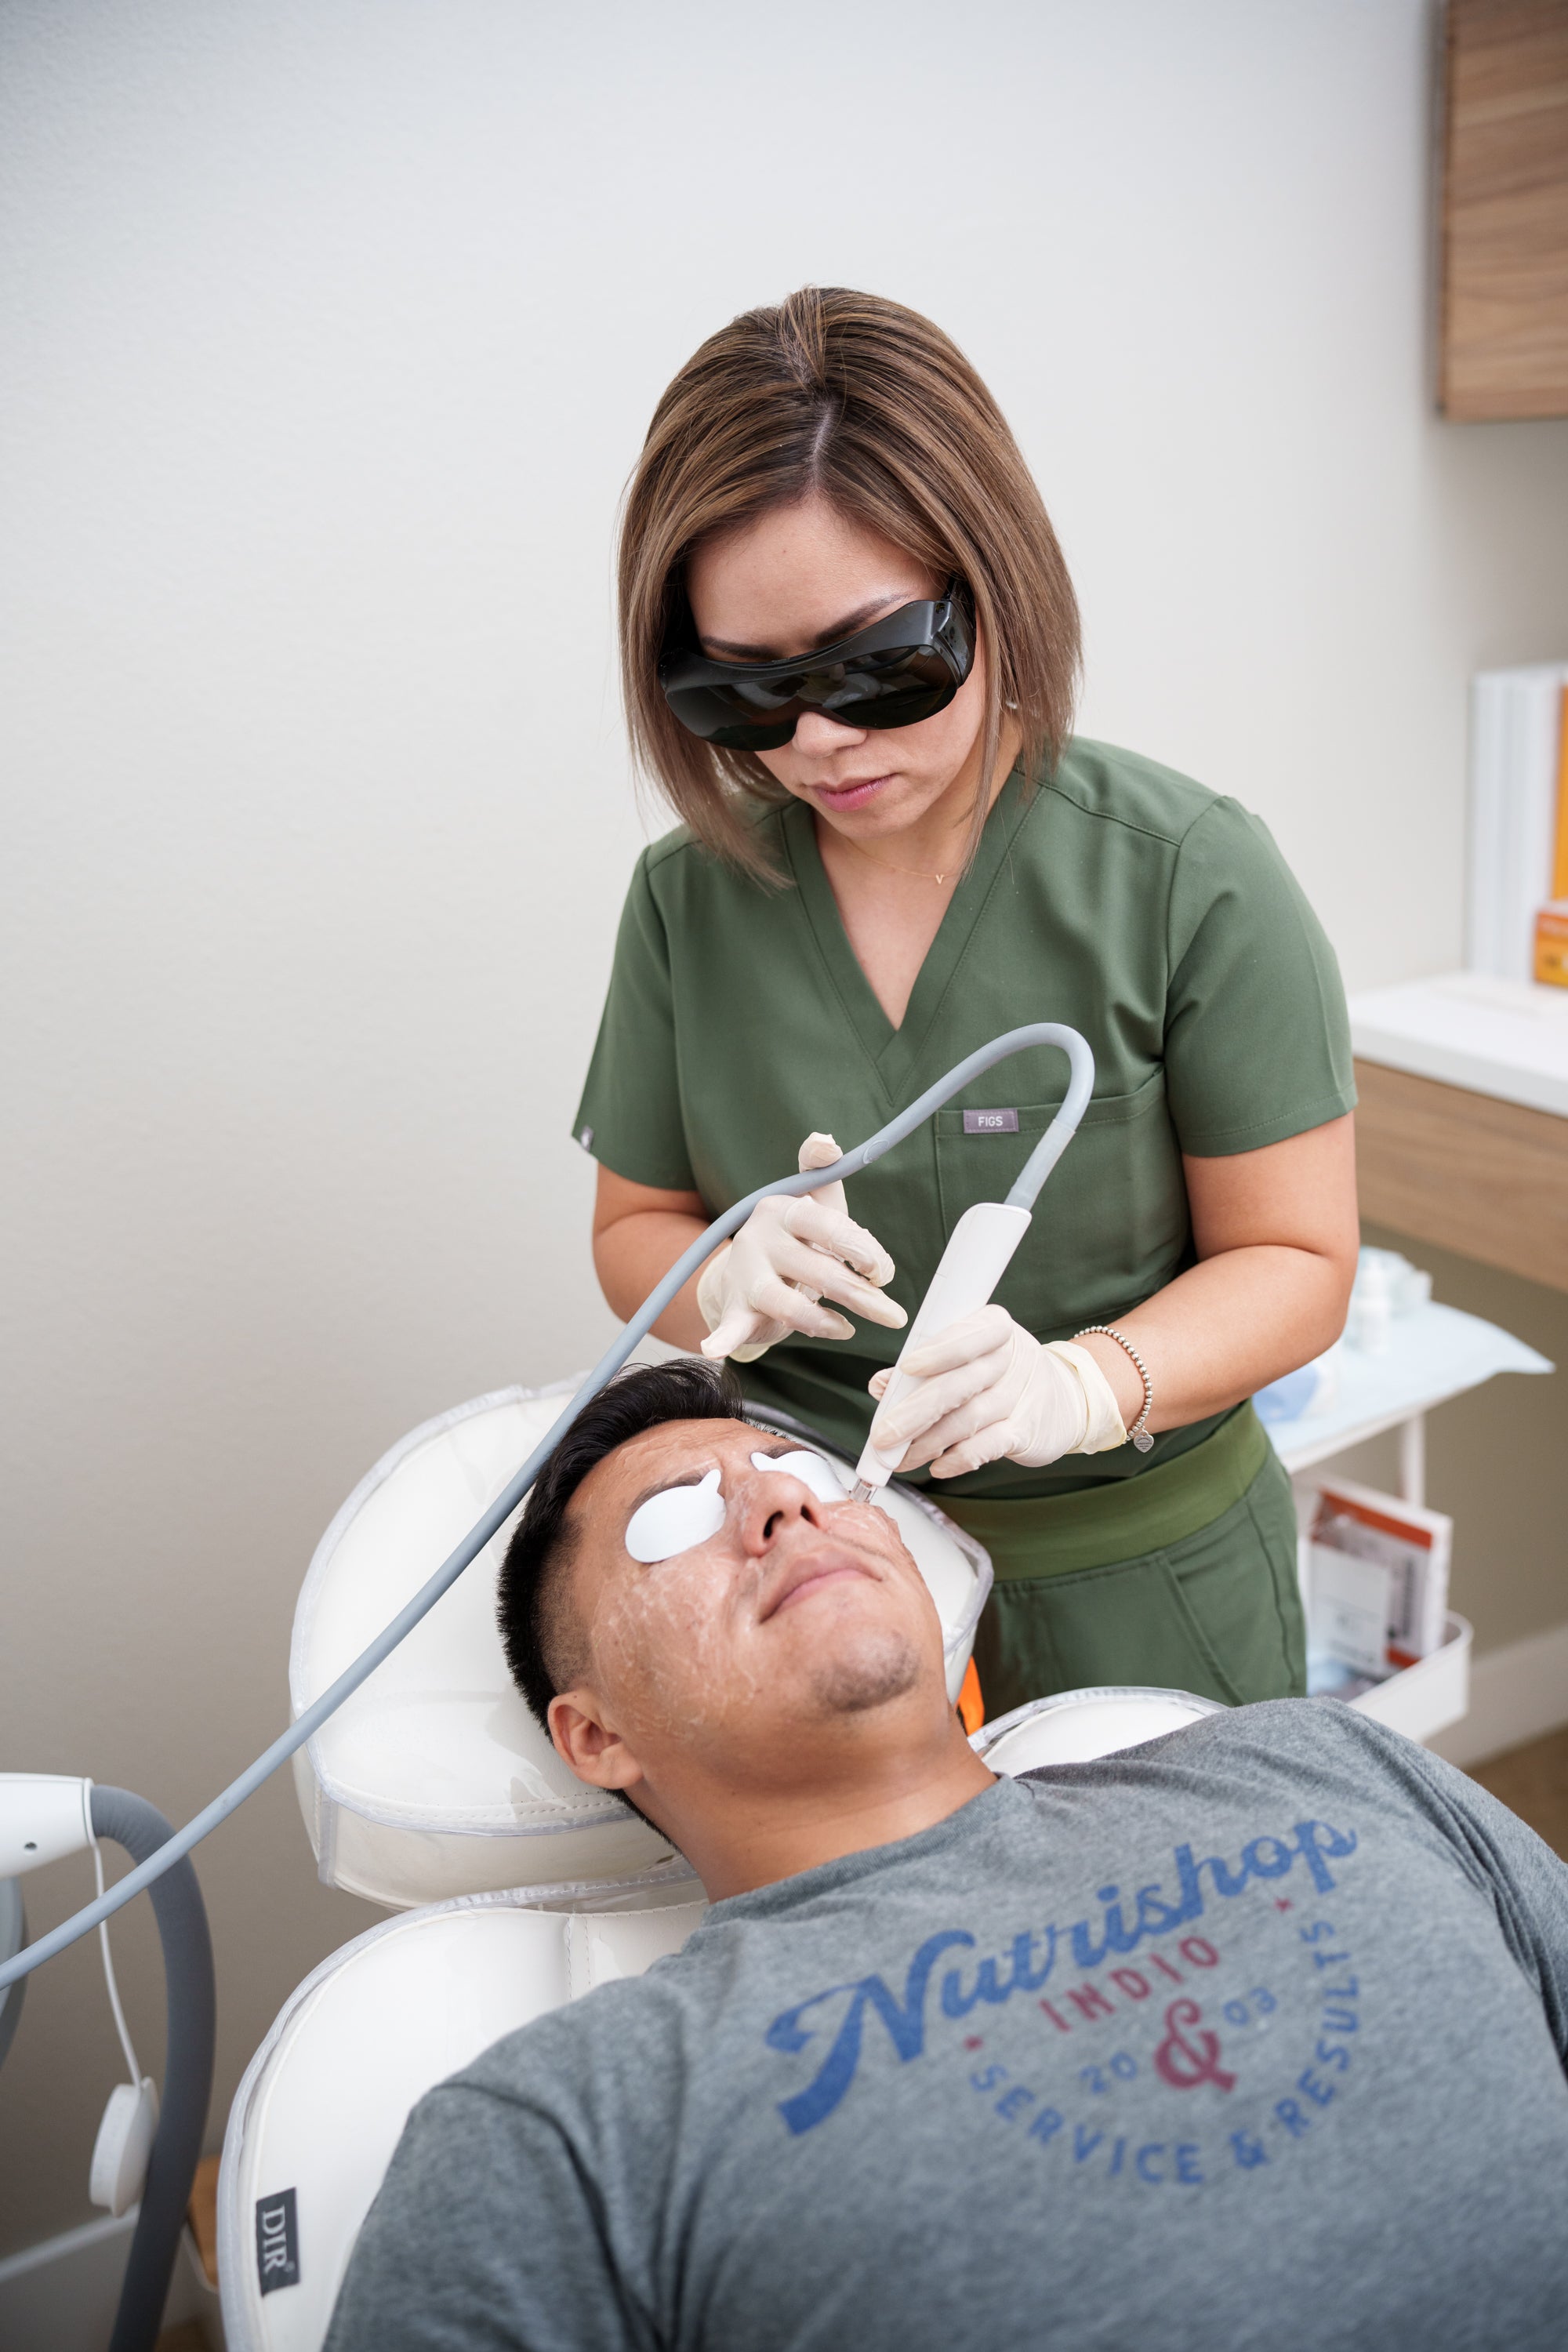 INTENSE PULSED LIGHT (IPL) THERAPY FOR DRY EYES - IseeU Optometry